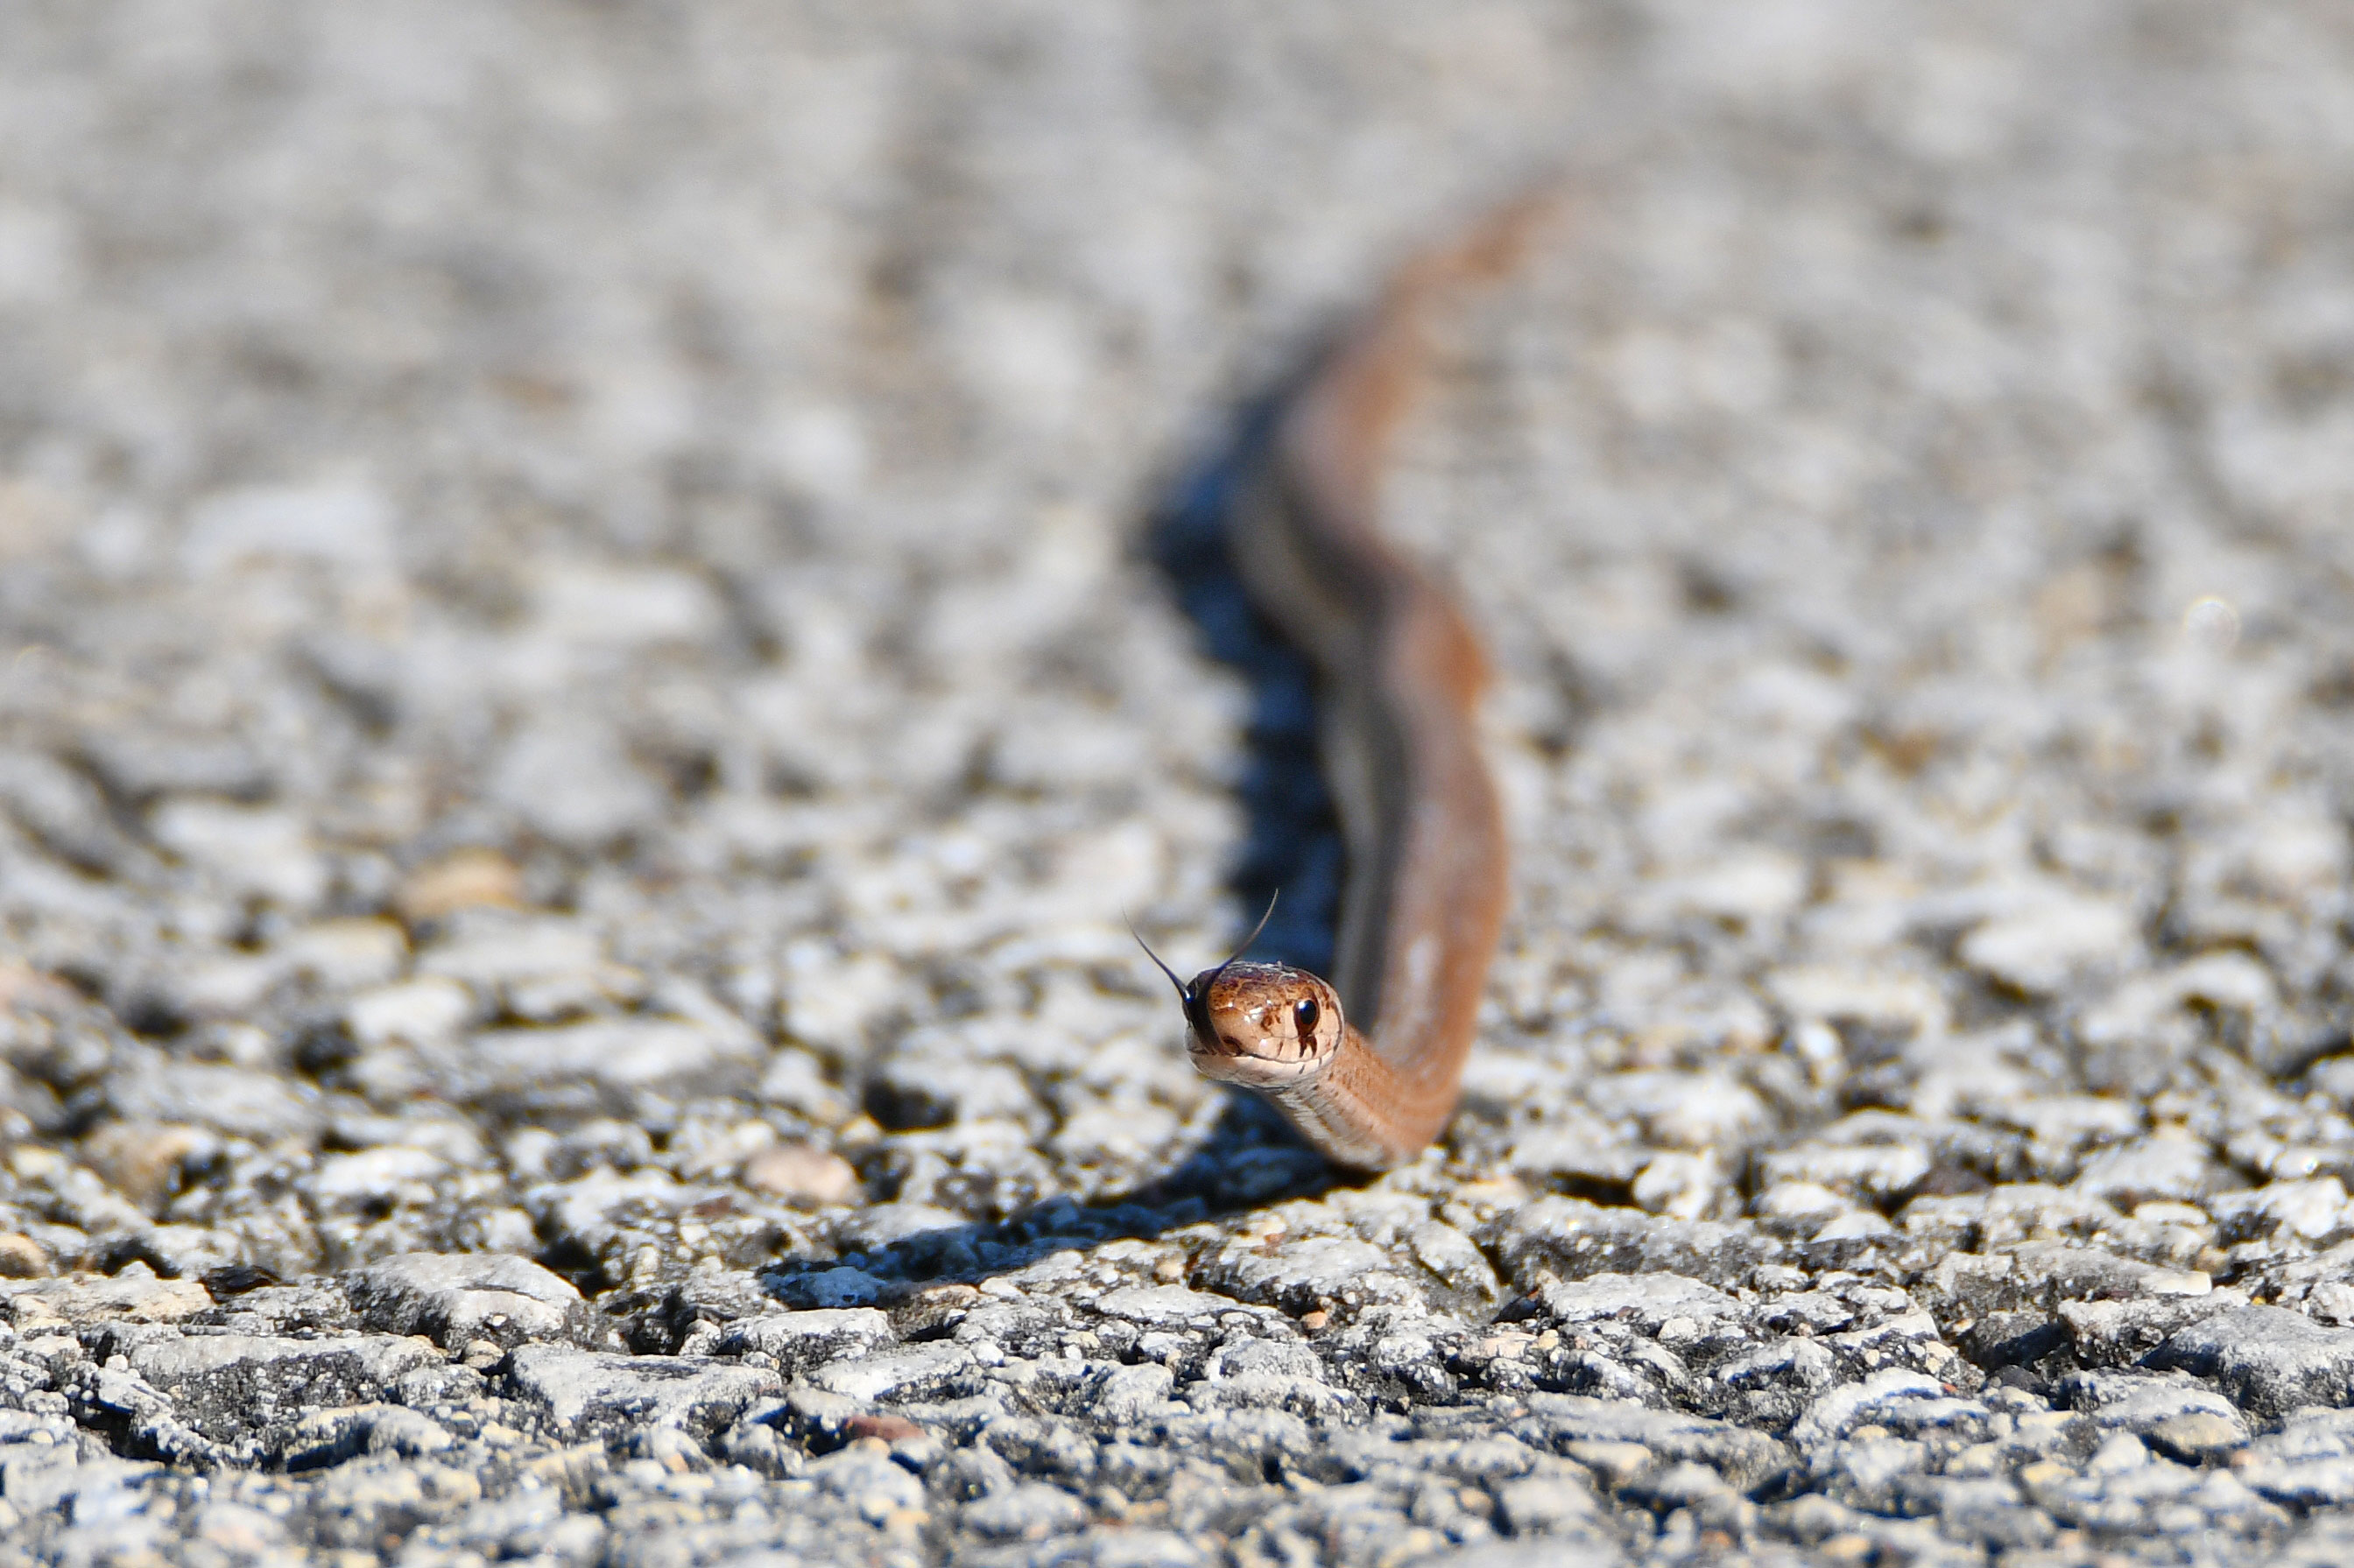 A midland brown snake slithering on the trail.